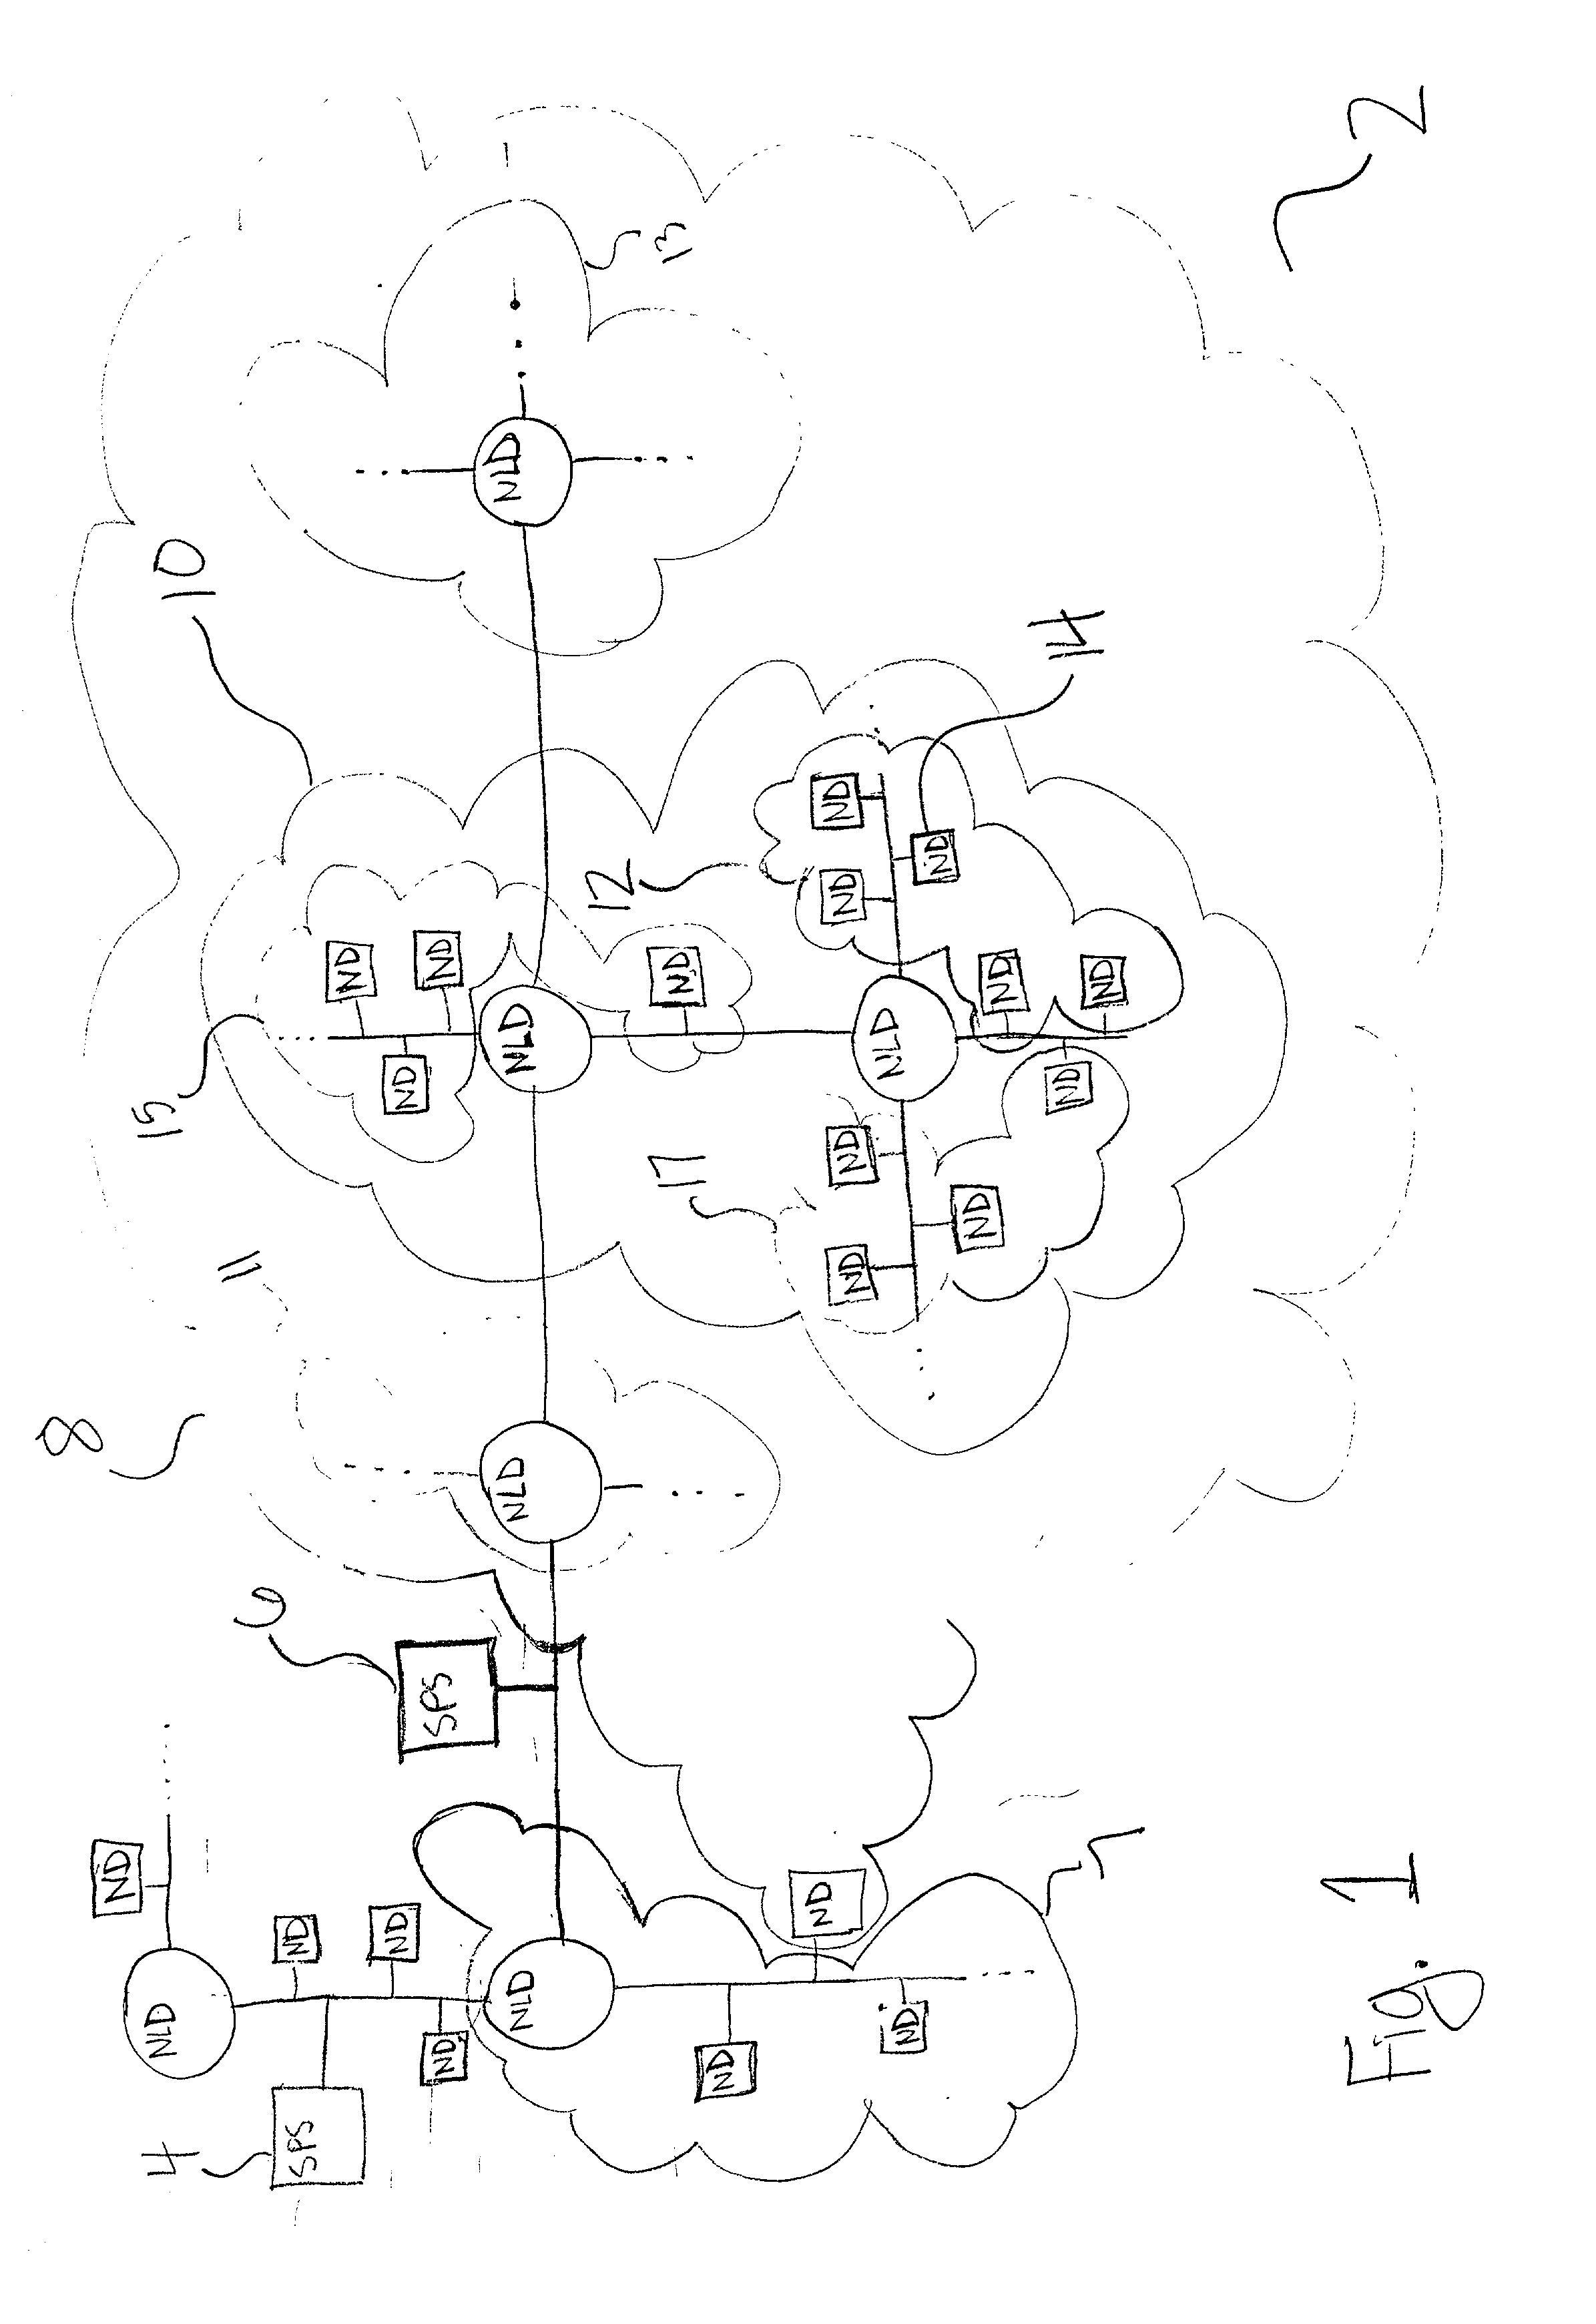 Organizing and combining a hierarchy of configuration parameters to produce an entity profile for an entity associated with a communications network